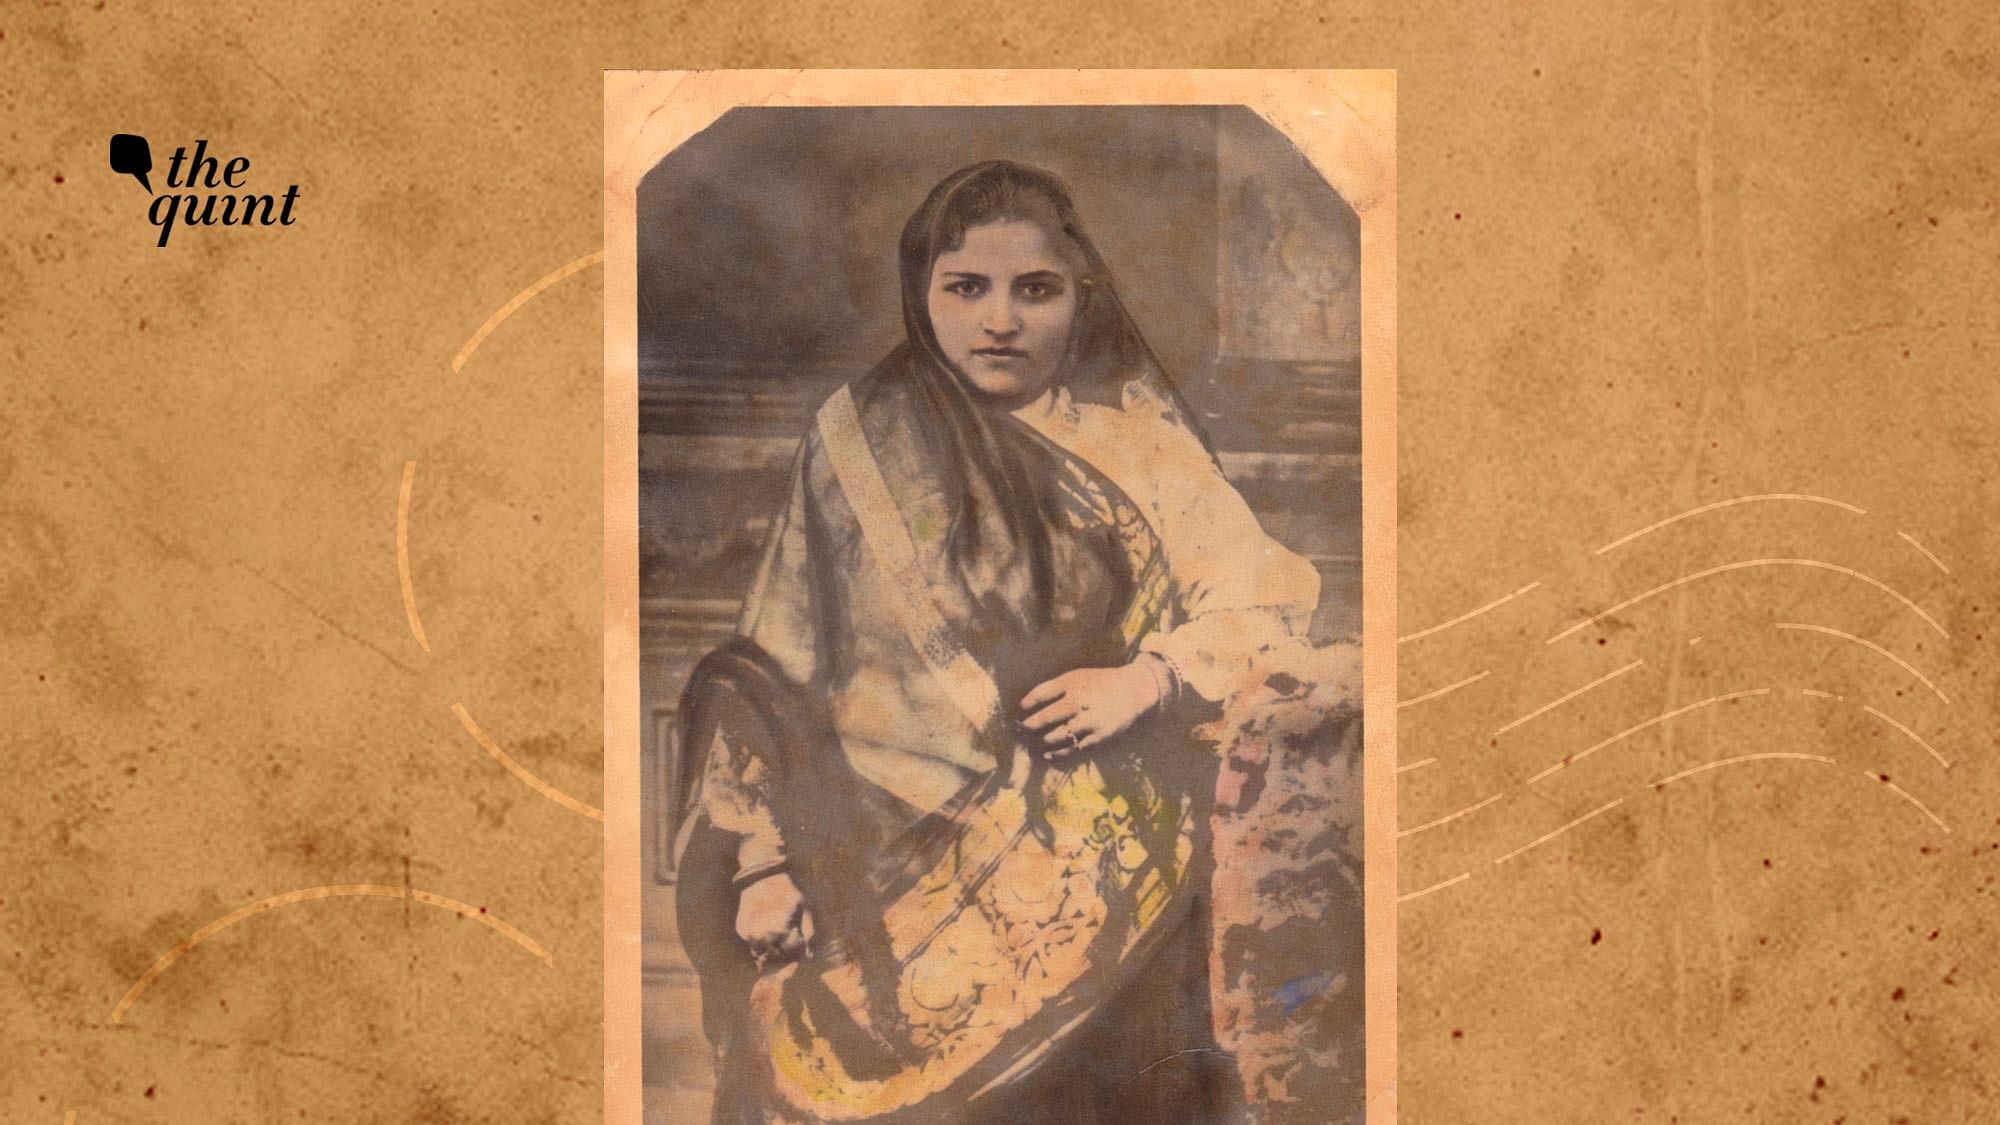 Kala Bagai arrived in San Francisco in 1915, being one of the first Indians on the West Coast. Now, there is a street in her name, honouring her legacy as an immigrant activist. 